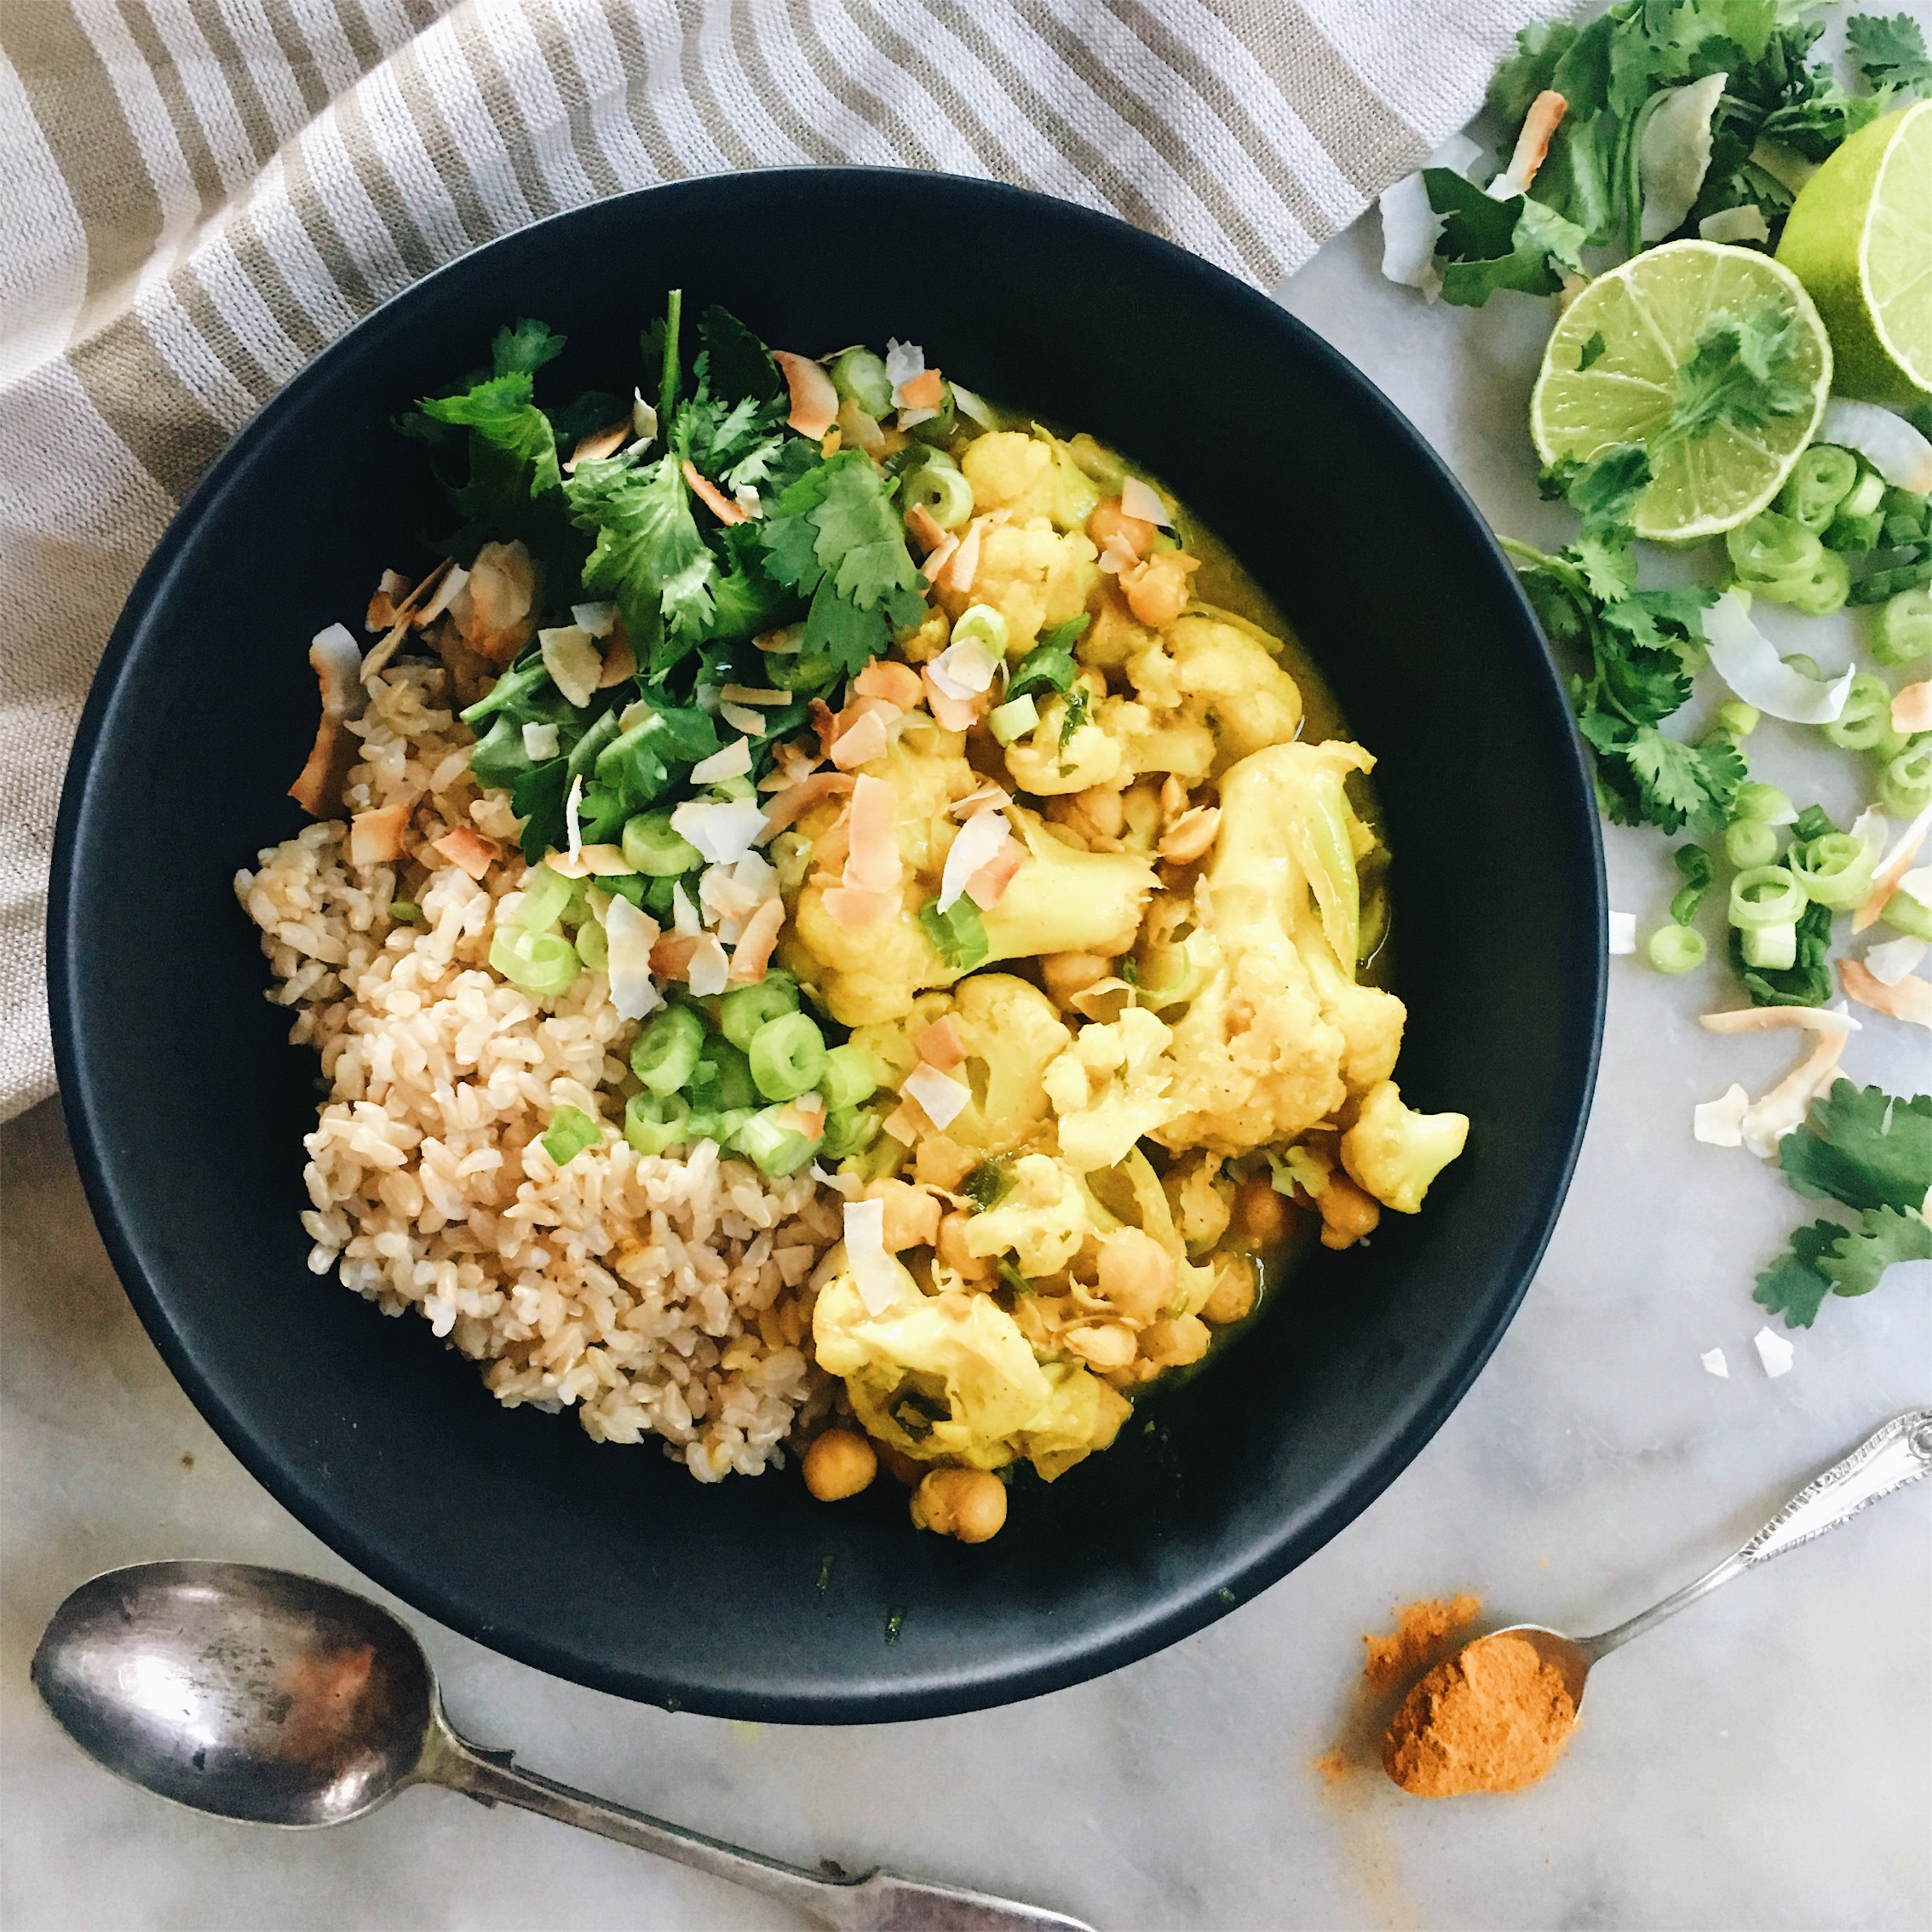 CAULIFLOWER AND CHICKPEA TURMERIC CURRY | The Healthy Hunter